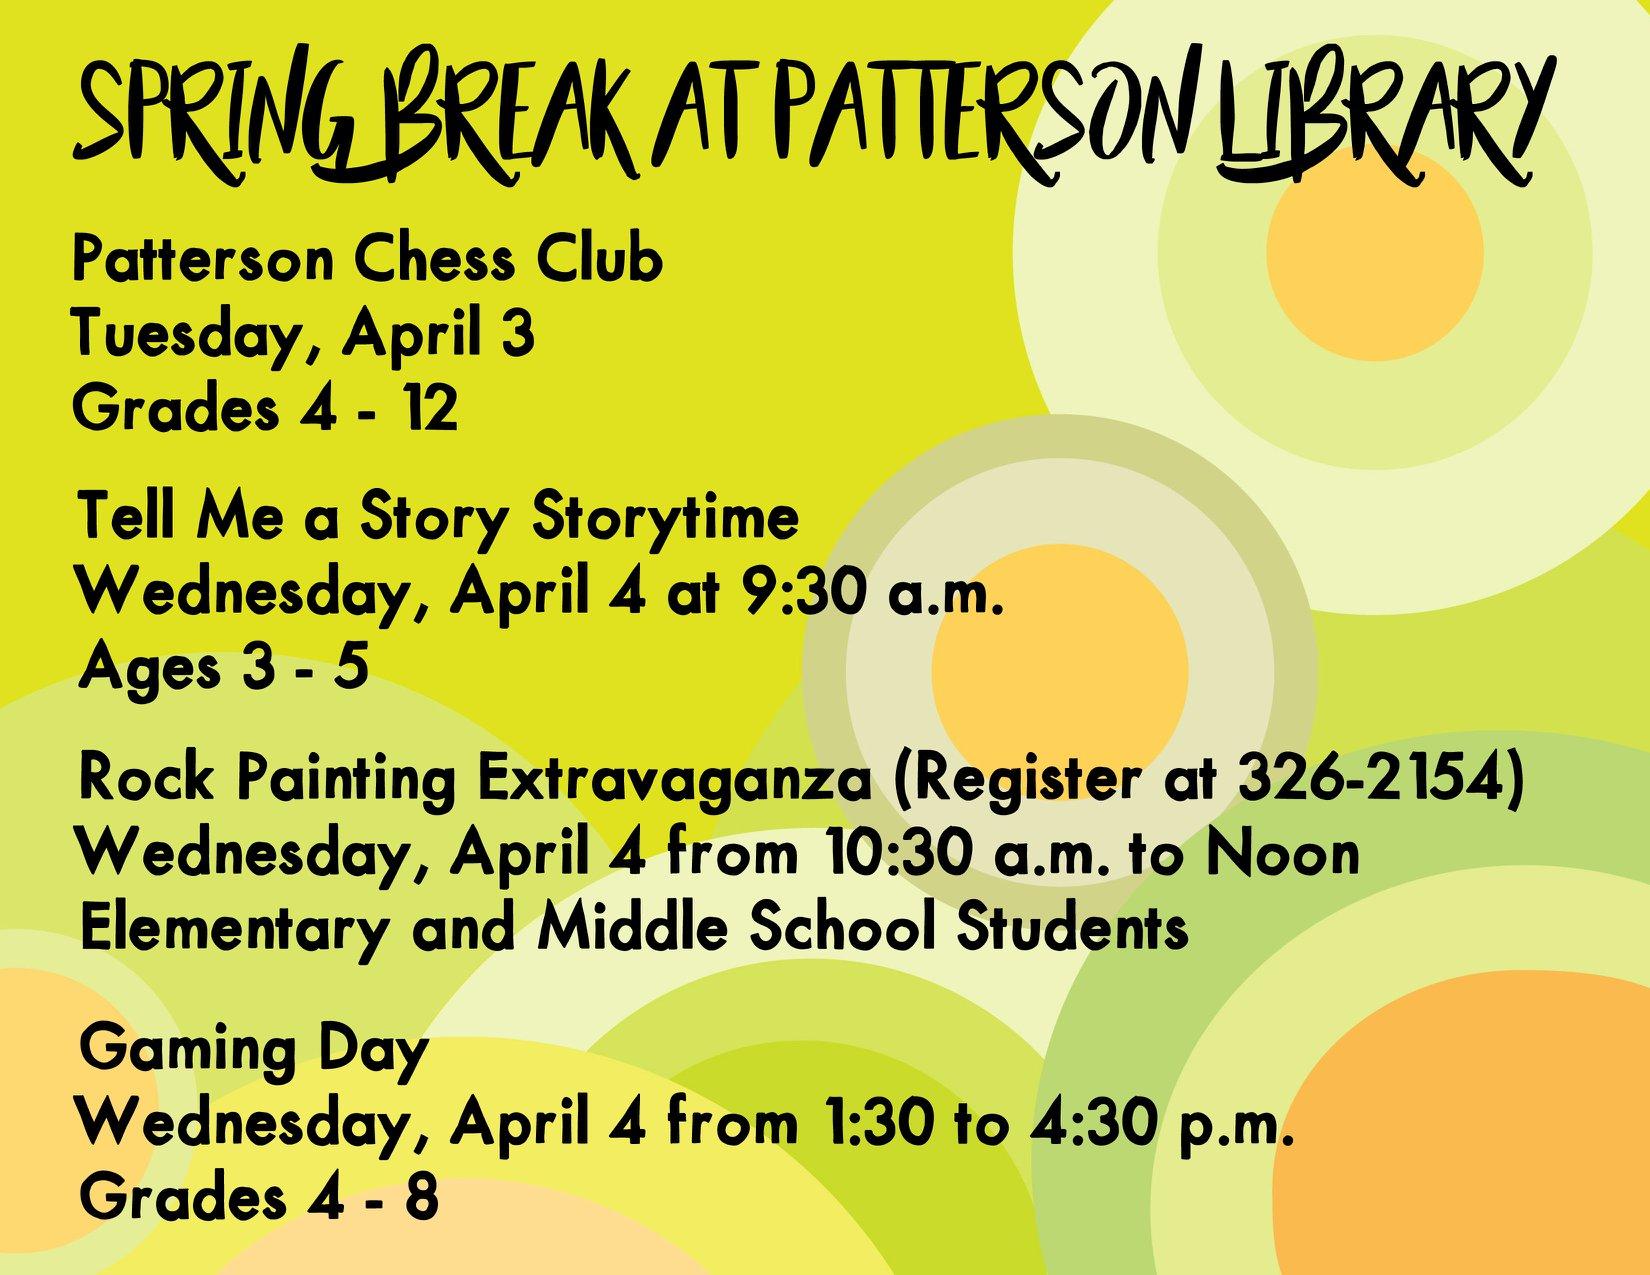 Spring Break at Patterson Library